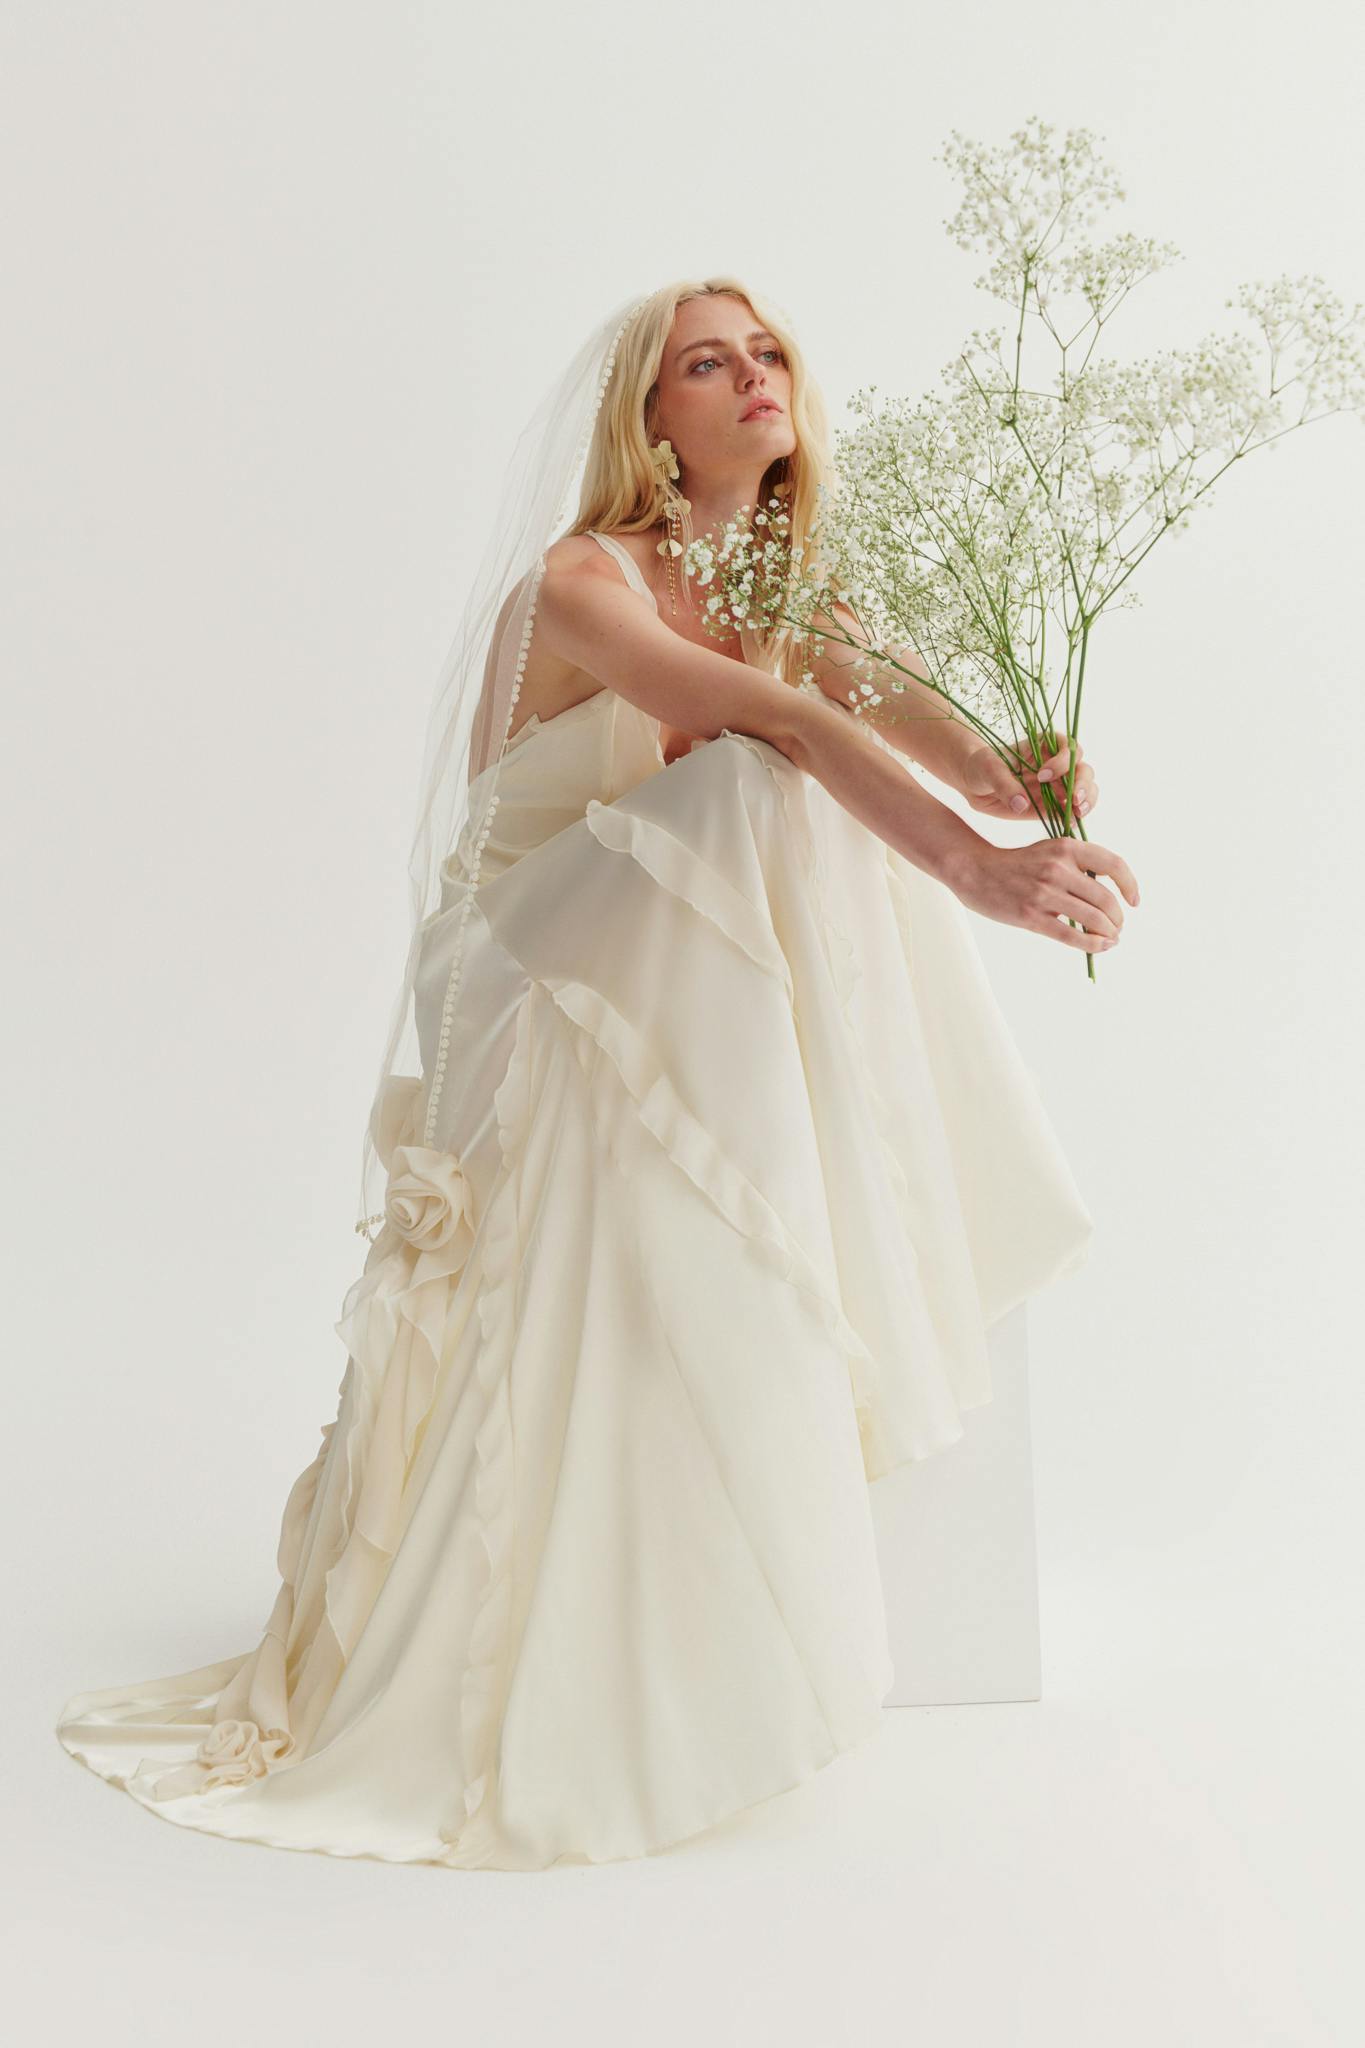 Bridal Collection by Chloe + Isabel - Issuu